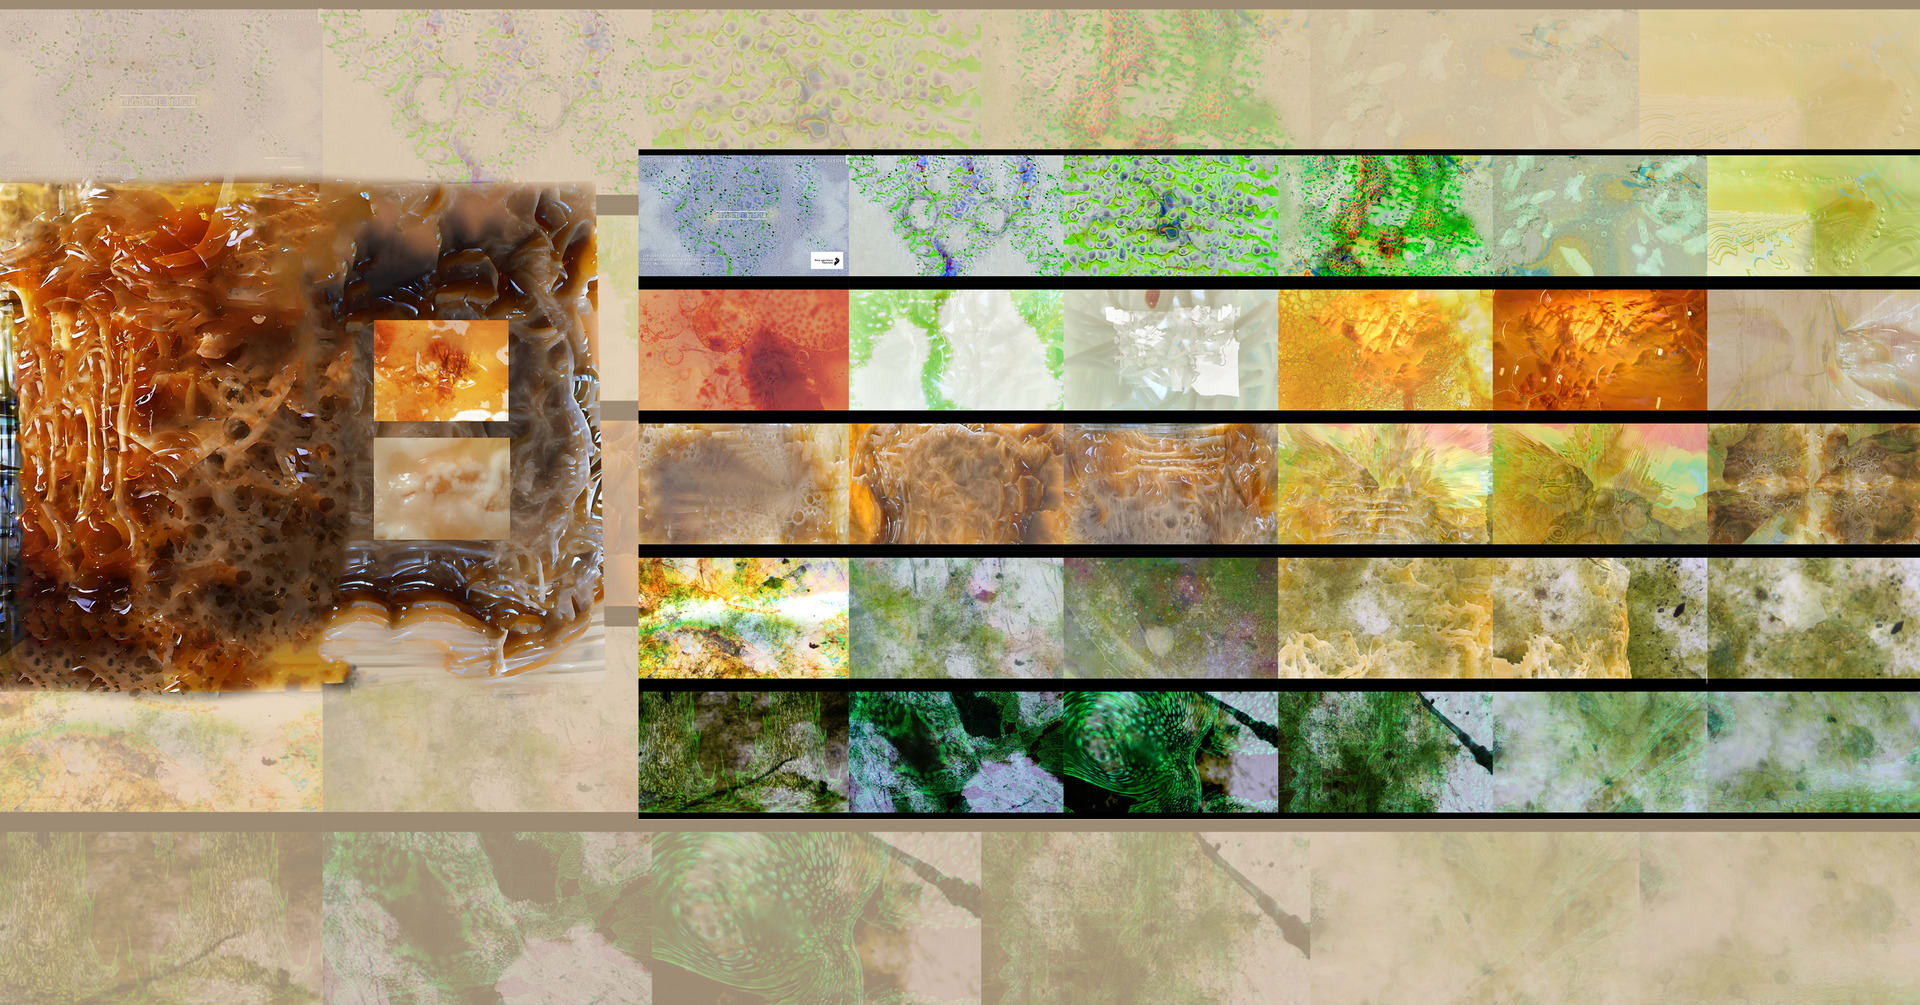 Image of various smaller images in different sizes, some laid out in a grid, some on top of a larger image, over a background of a translucent version of the grid of smaller images. 